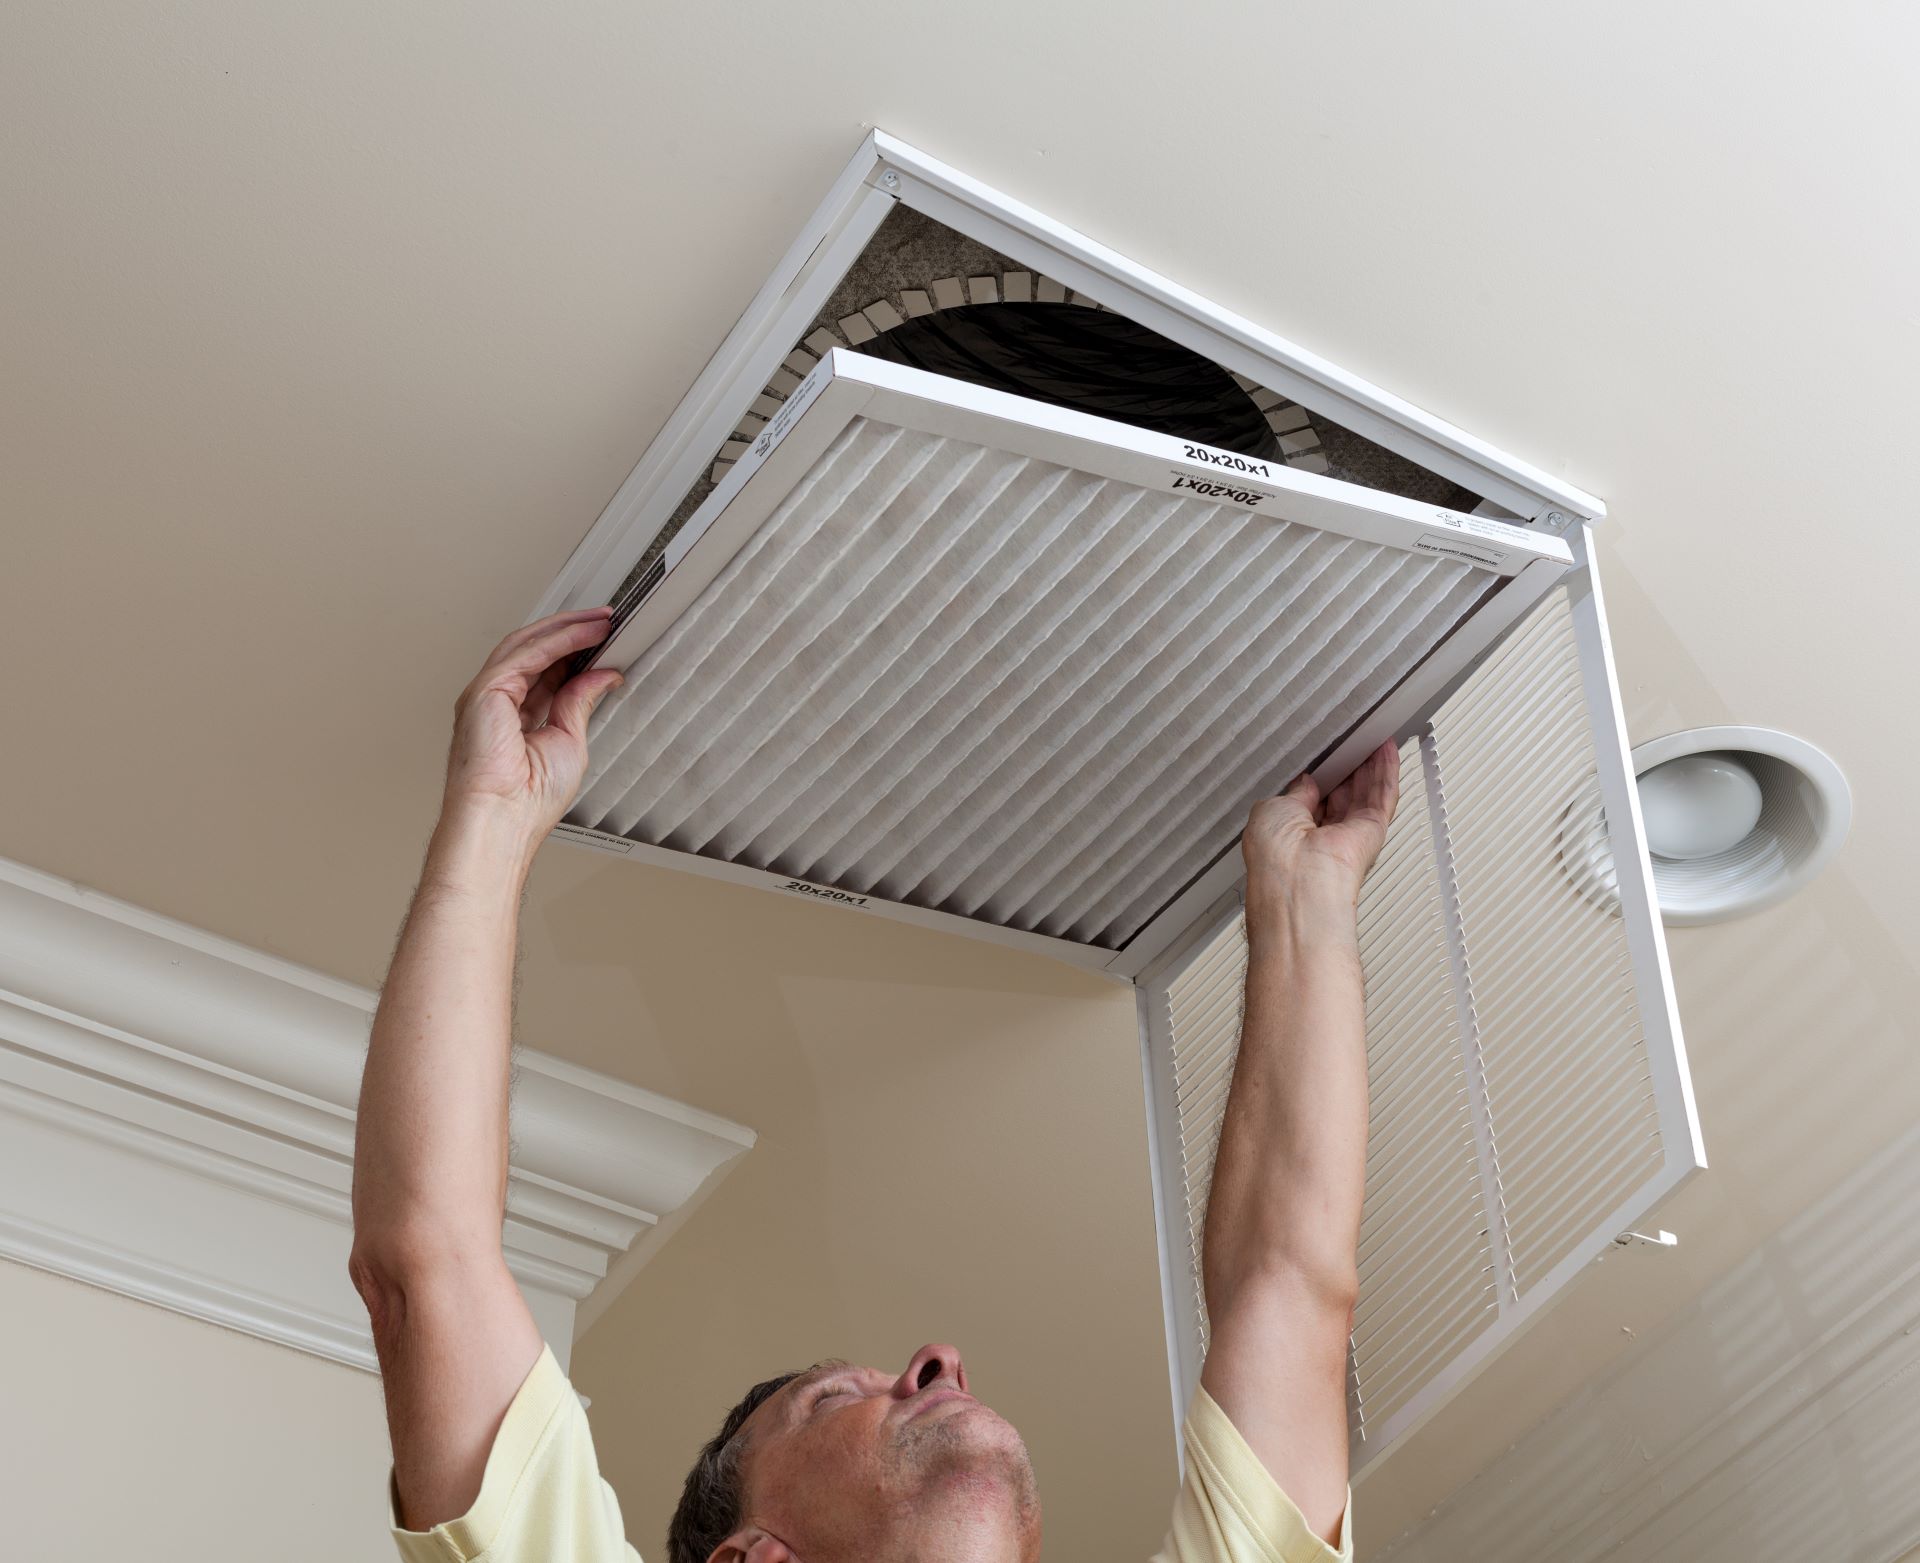 Man changing home ventilation filters